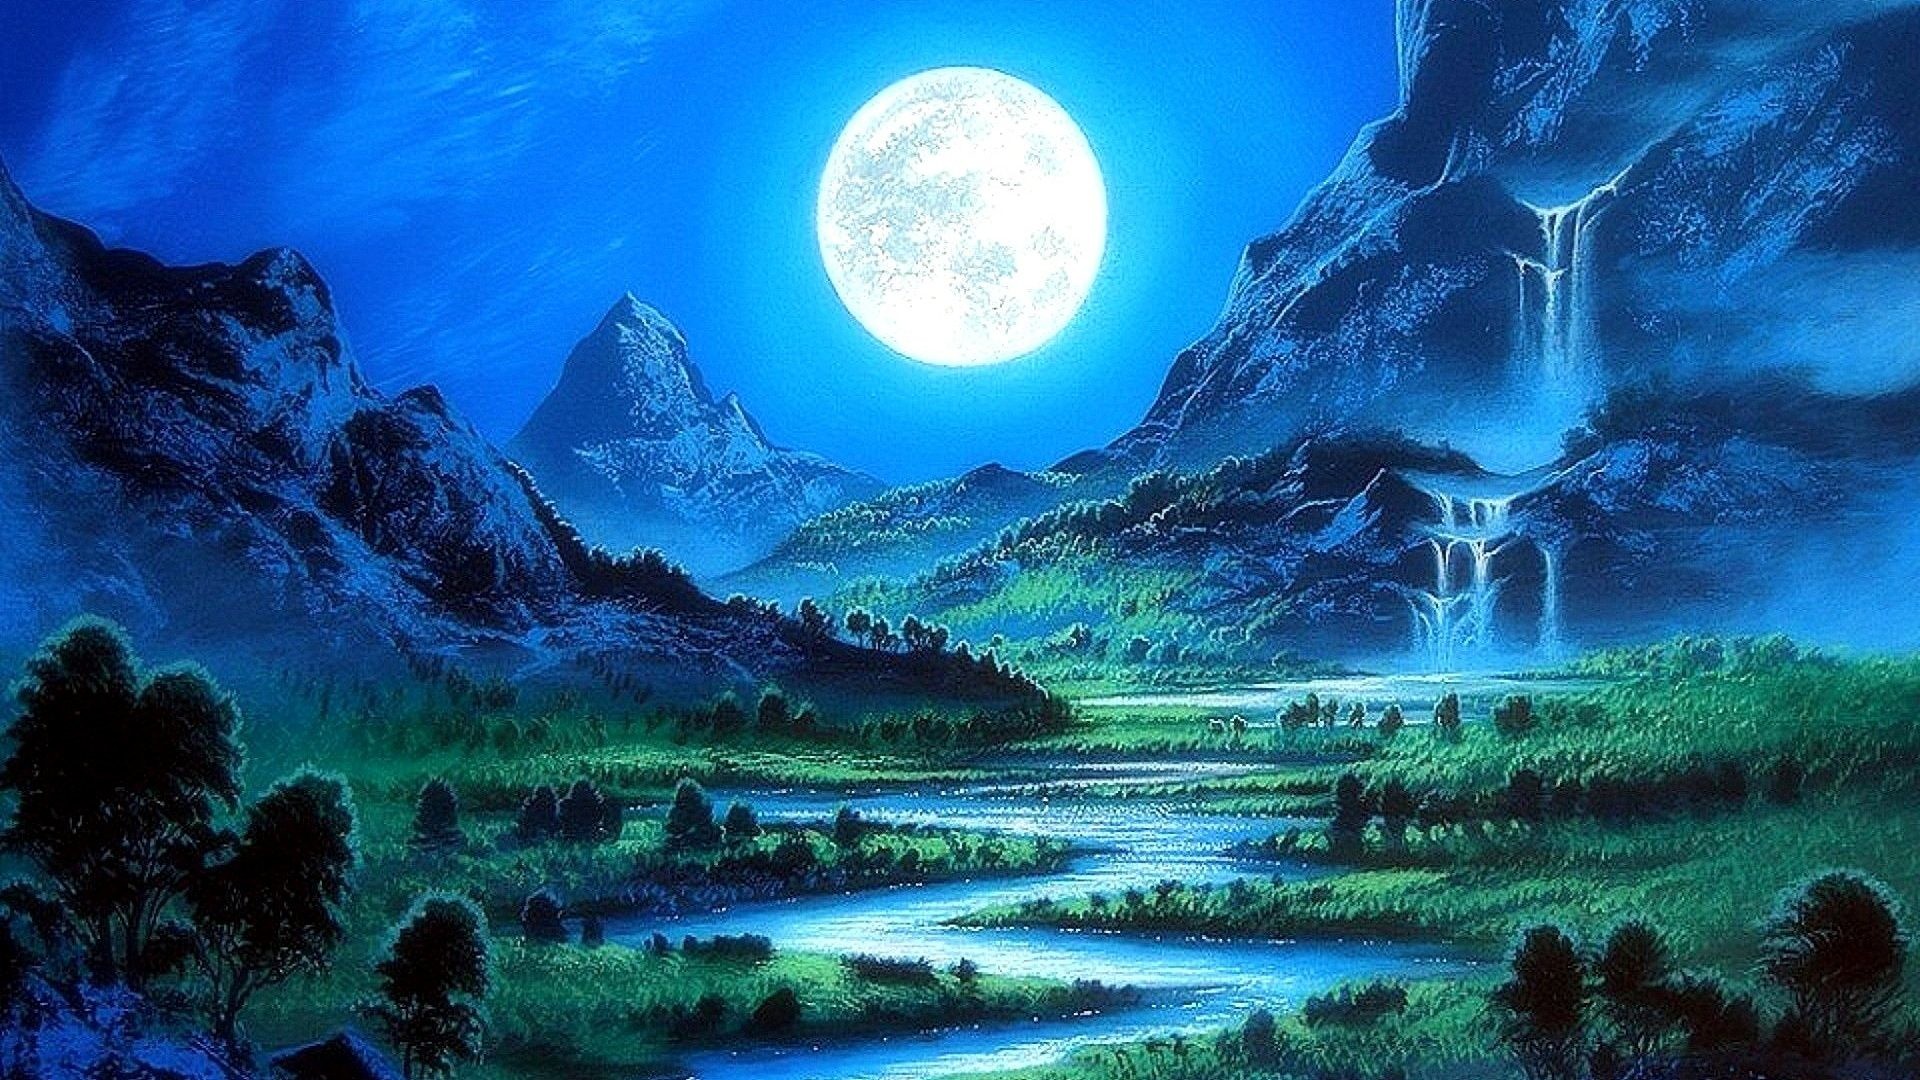 1920x1080 moonlight tag paradise colors sky mountains four trees seasons moon light  wallpapers images photos and pictures for free